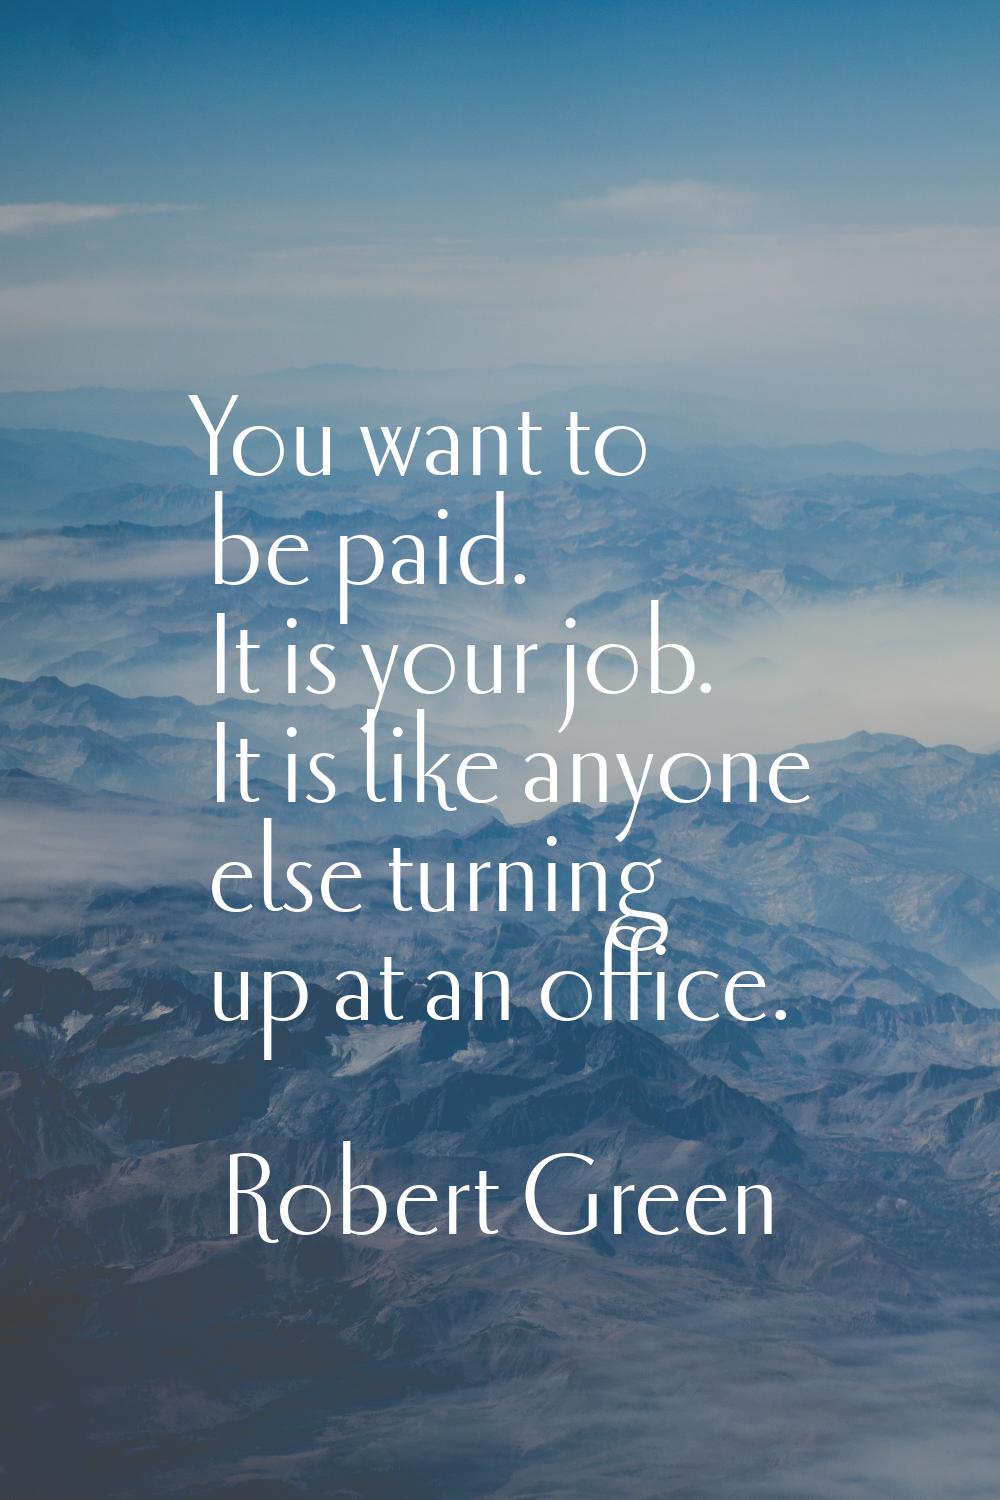 You want to be paid. It is your job. It is like anyone else turning up at an office.